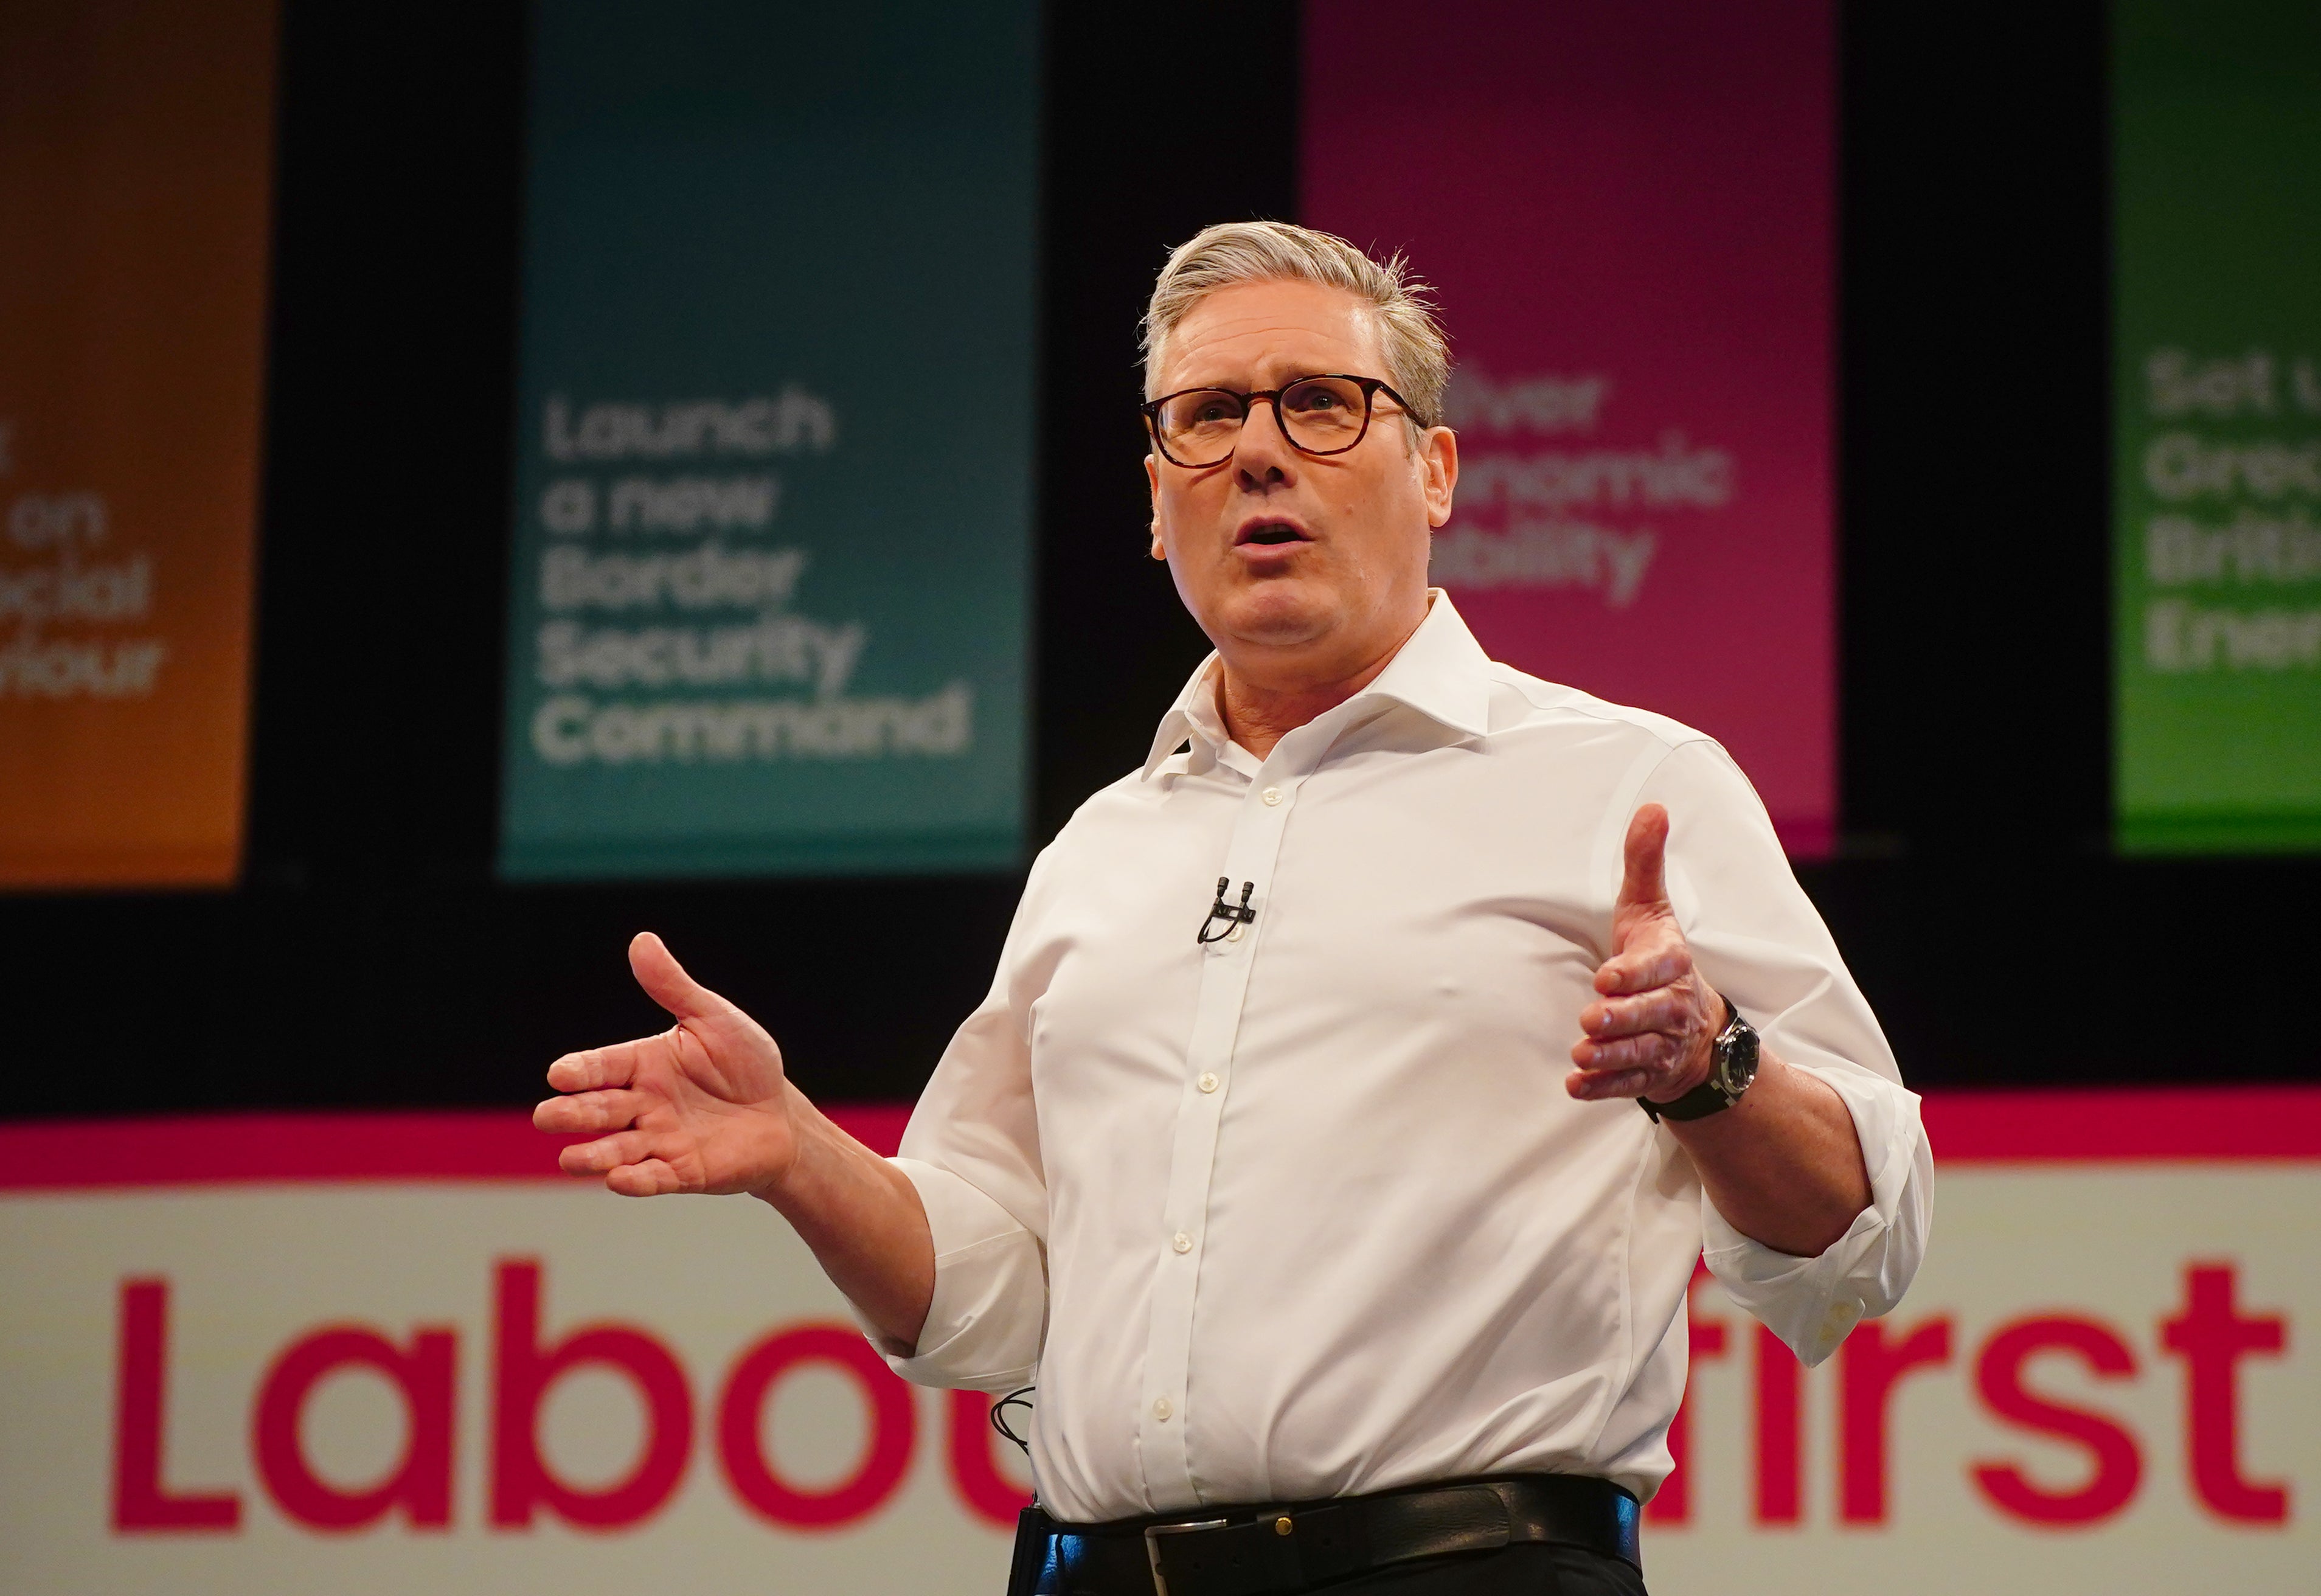 Sir Keir Starmer launched a presidential-style campaign ahead of the general election this year